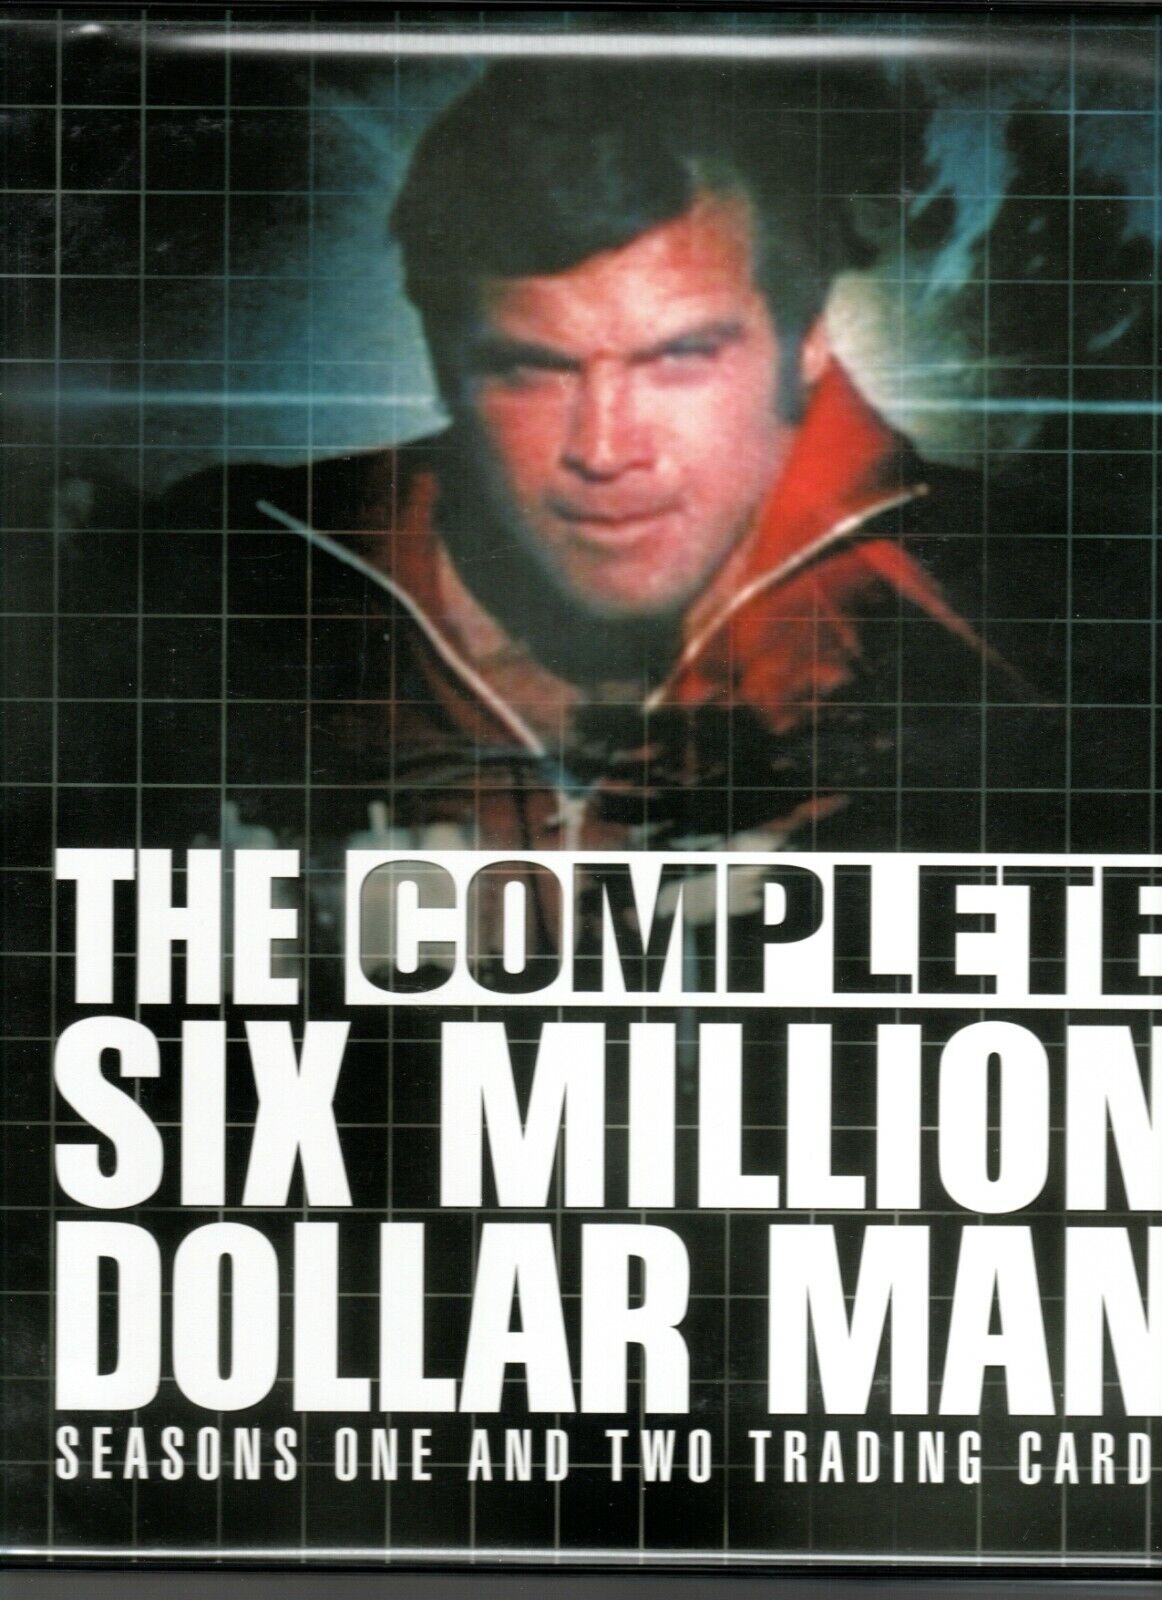 THE SIX MILLION DOLLAR MAN SEASONS 1 & 2 FACTORY BINDER ONLY (NO CARDS INCLUDED)